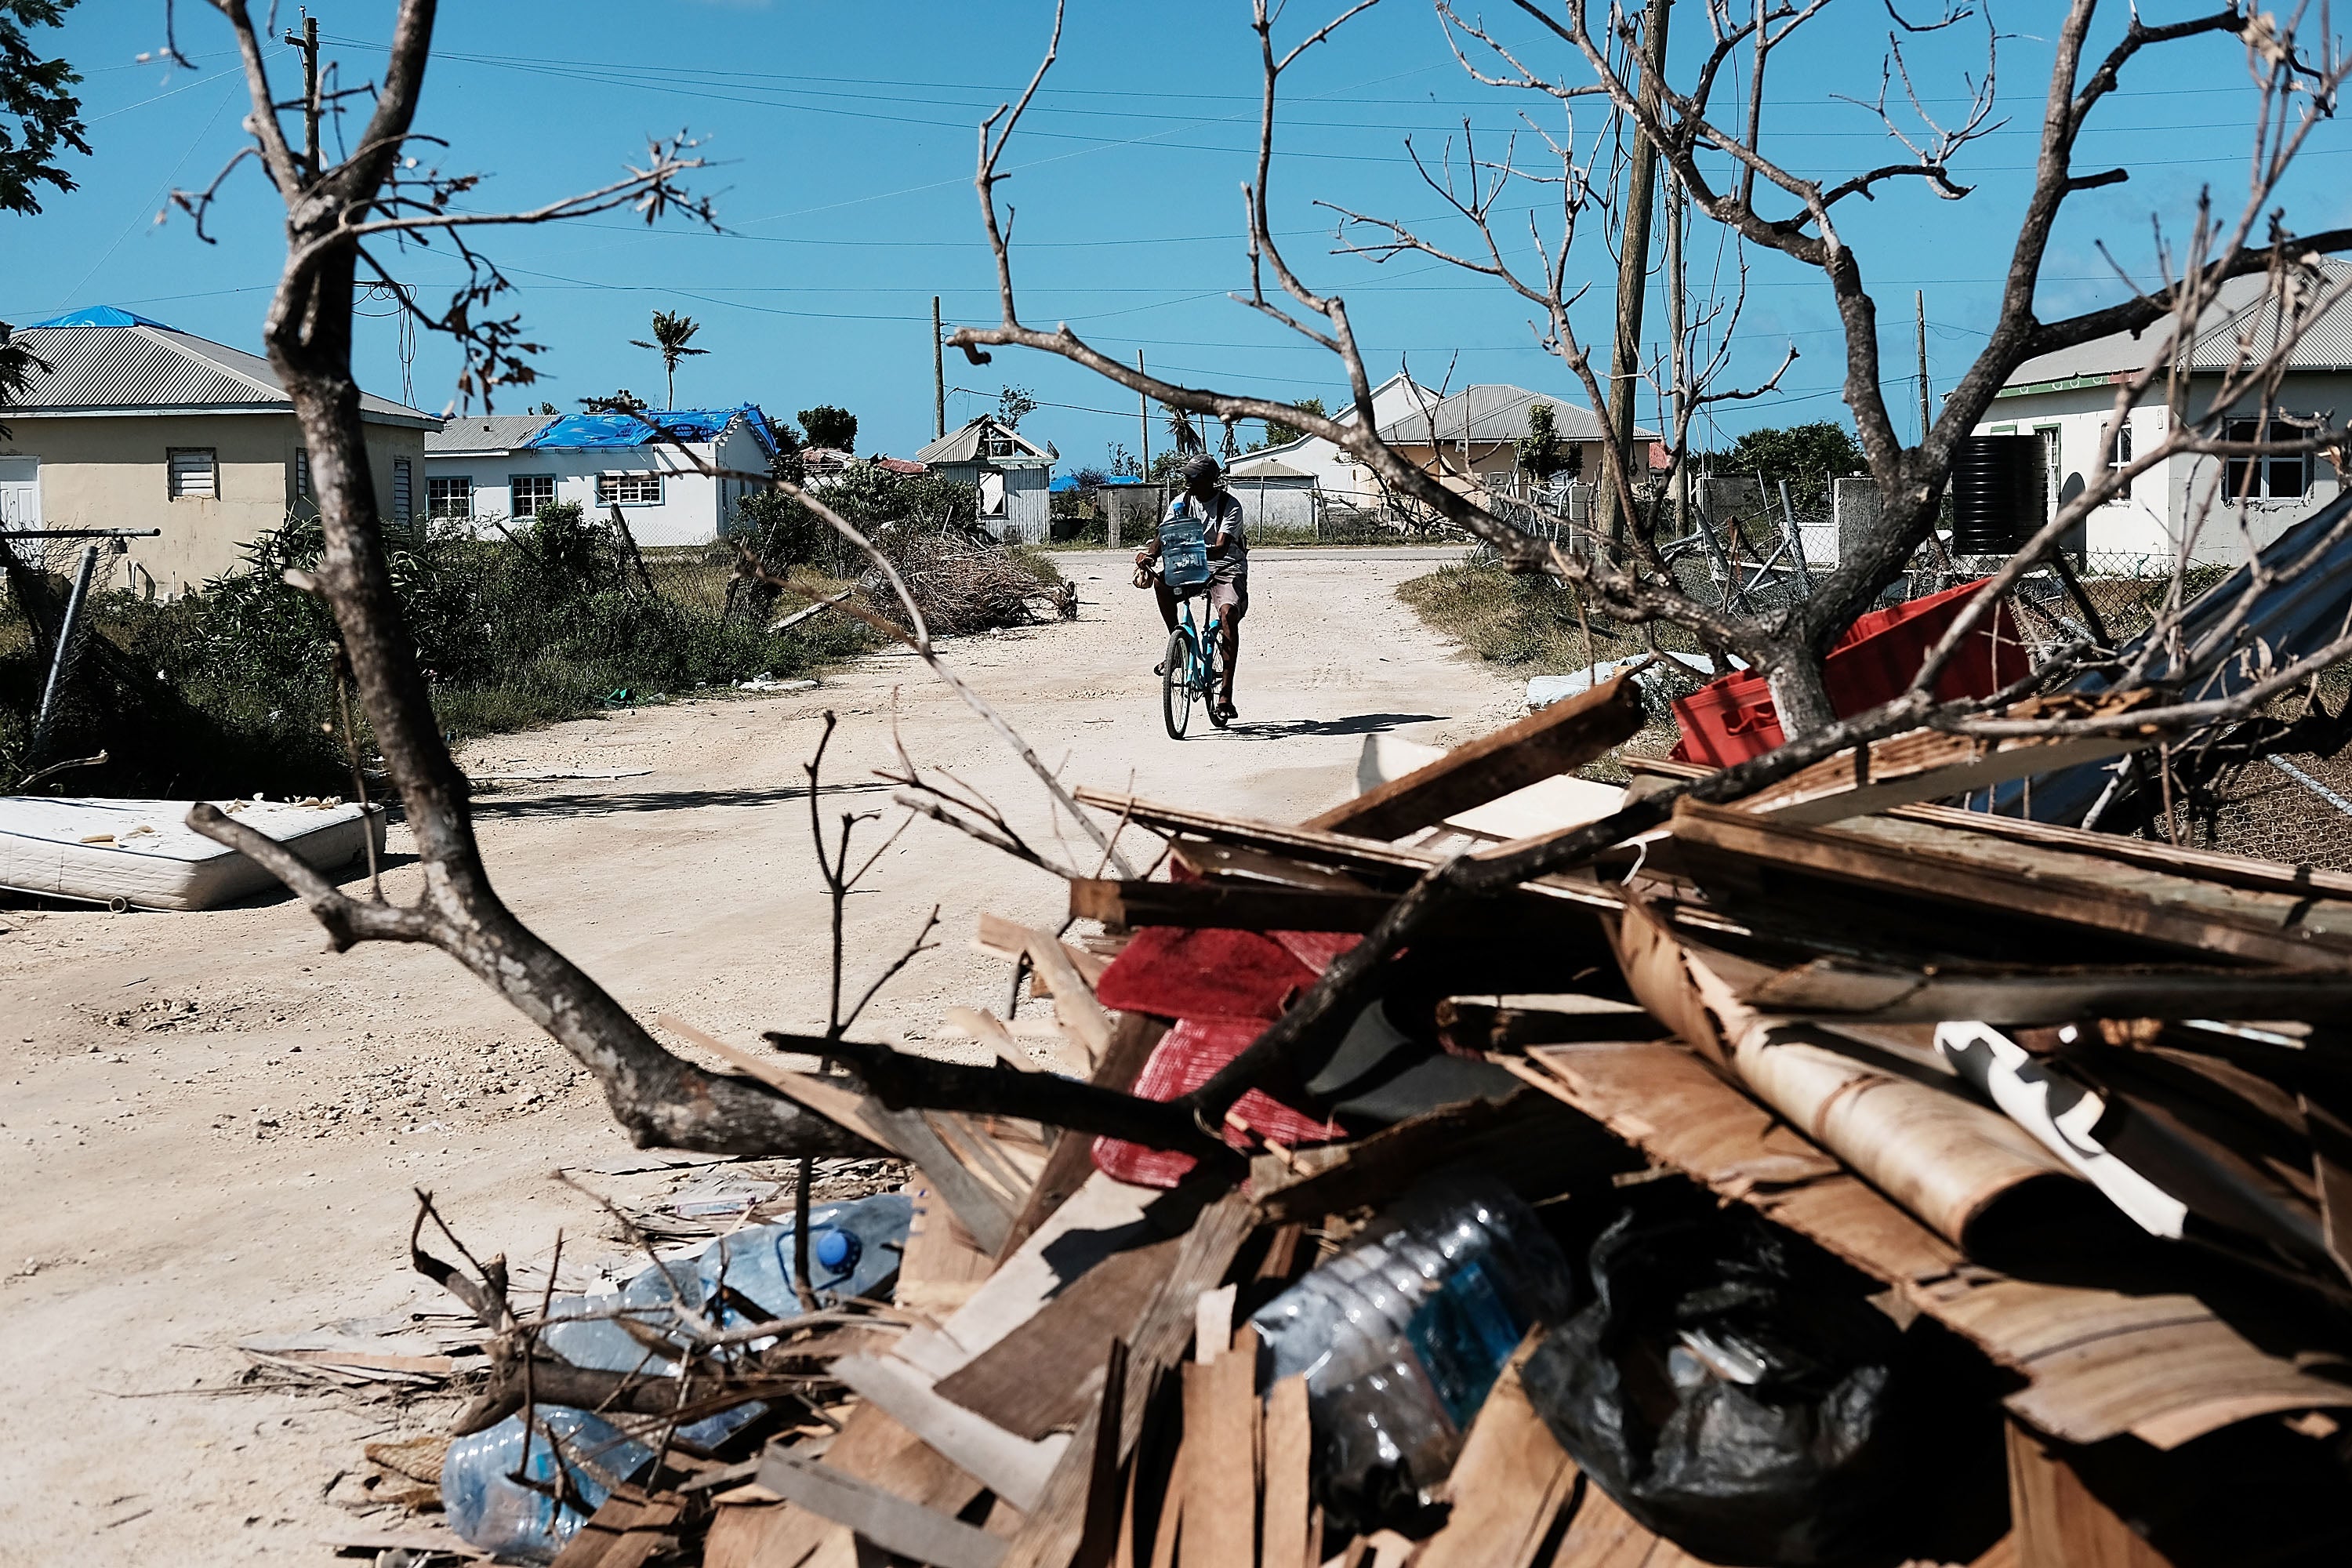 Debris from damaged homes lines a street on the nearly destroyed island of Barbuda on 8 December 2017 in Cordington, Barbuda.